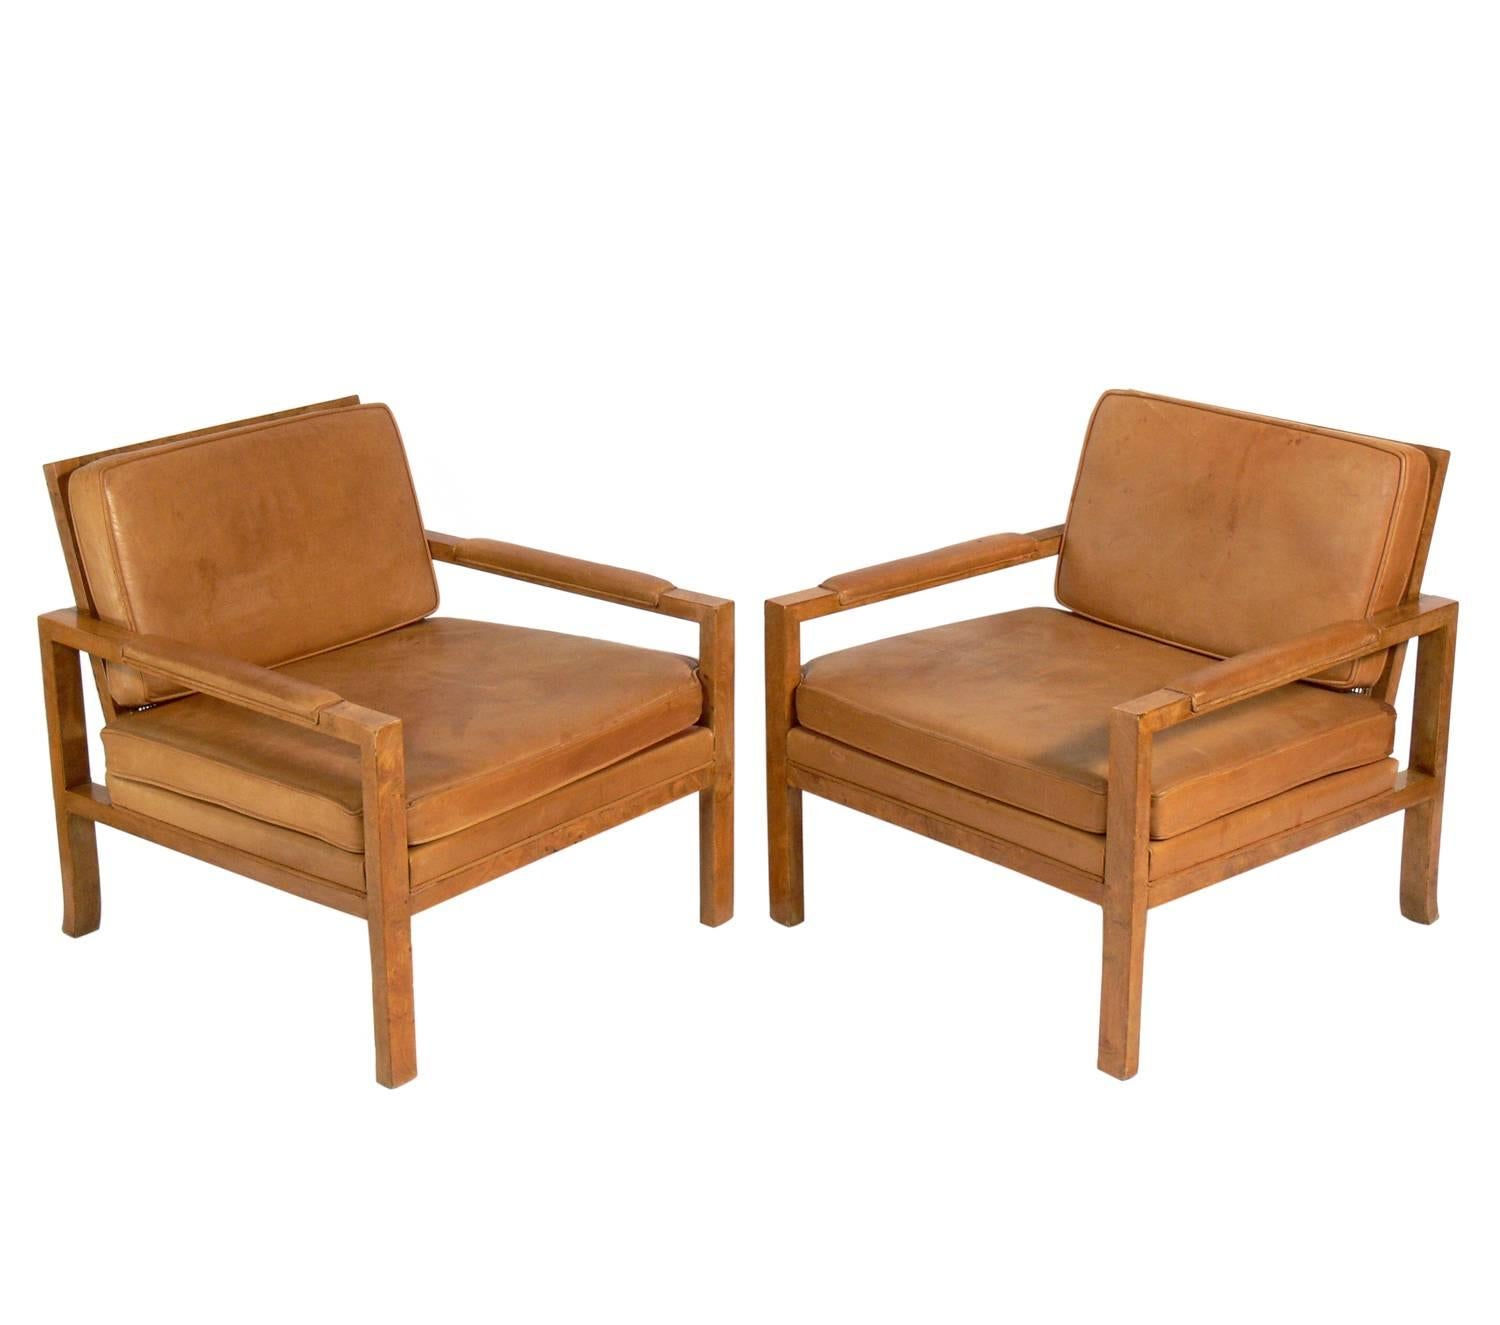 Pair of caned back burl wood lounge chairs in original saddle leather, American, circa 1960s. They retain their warm original patina to the burl wood frames and the saddle leather upholstery.